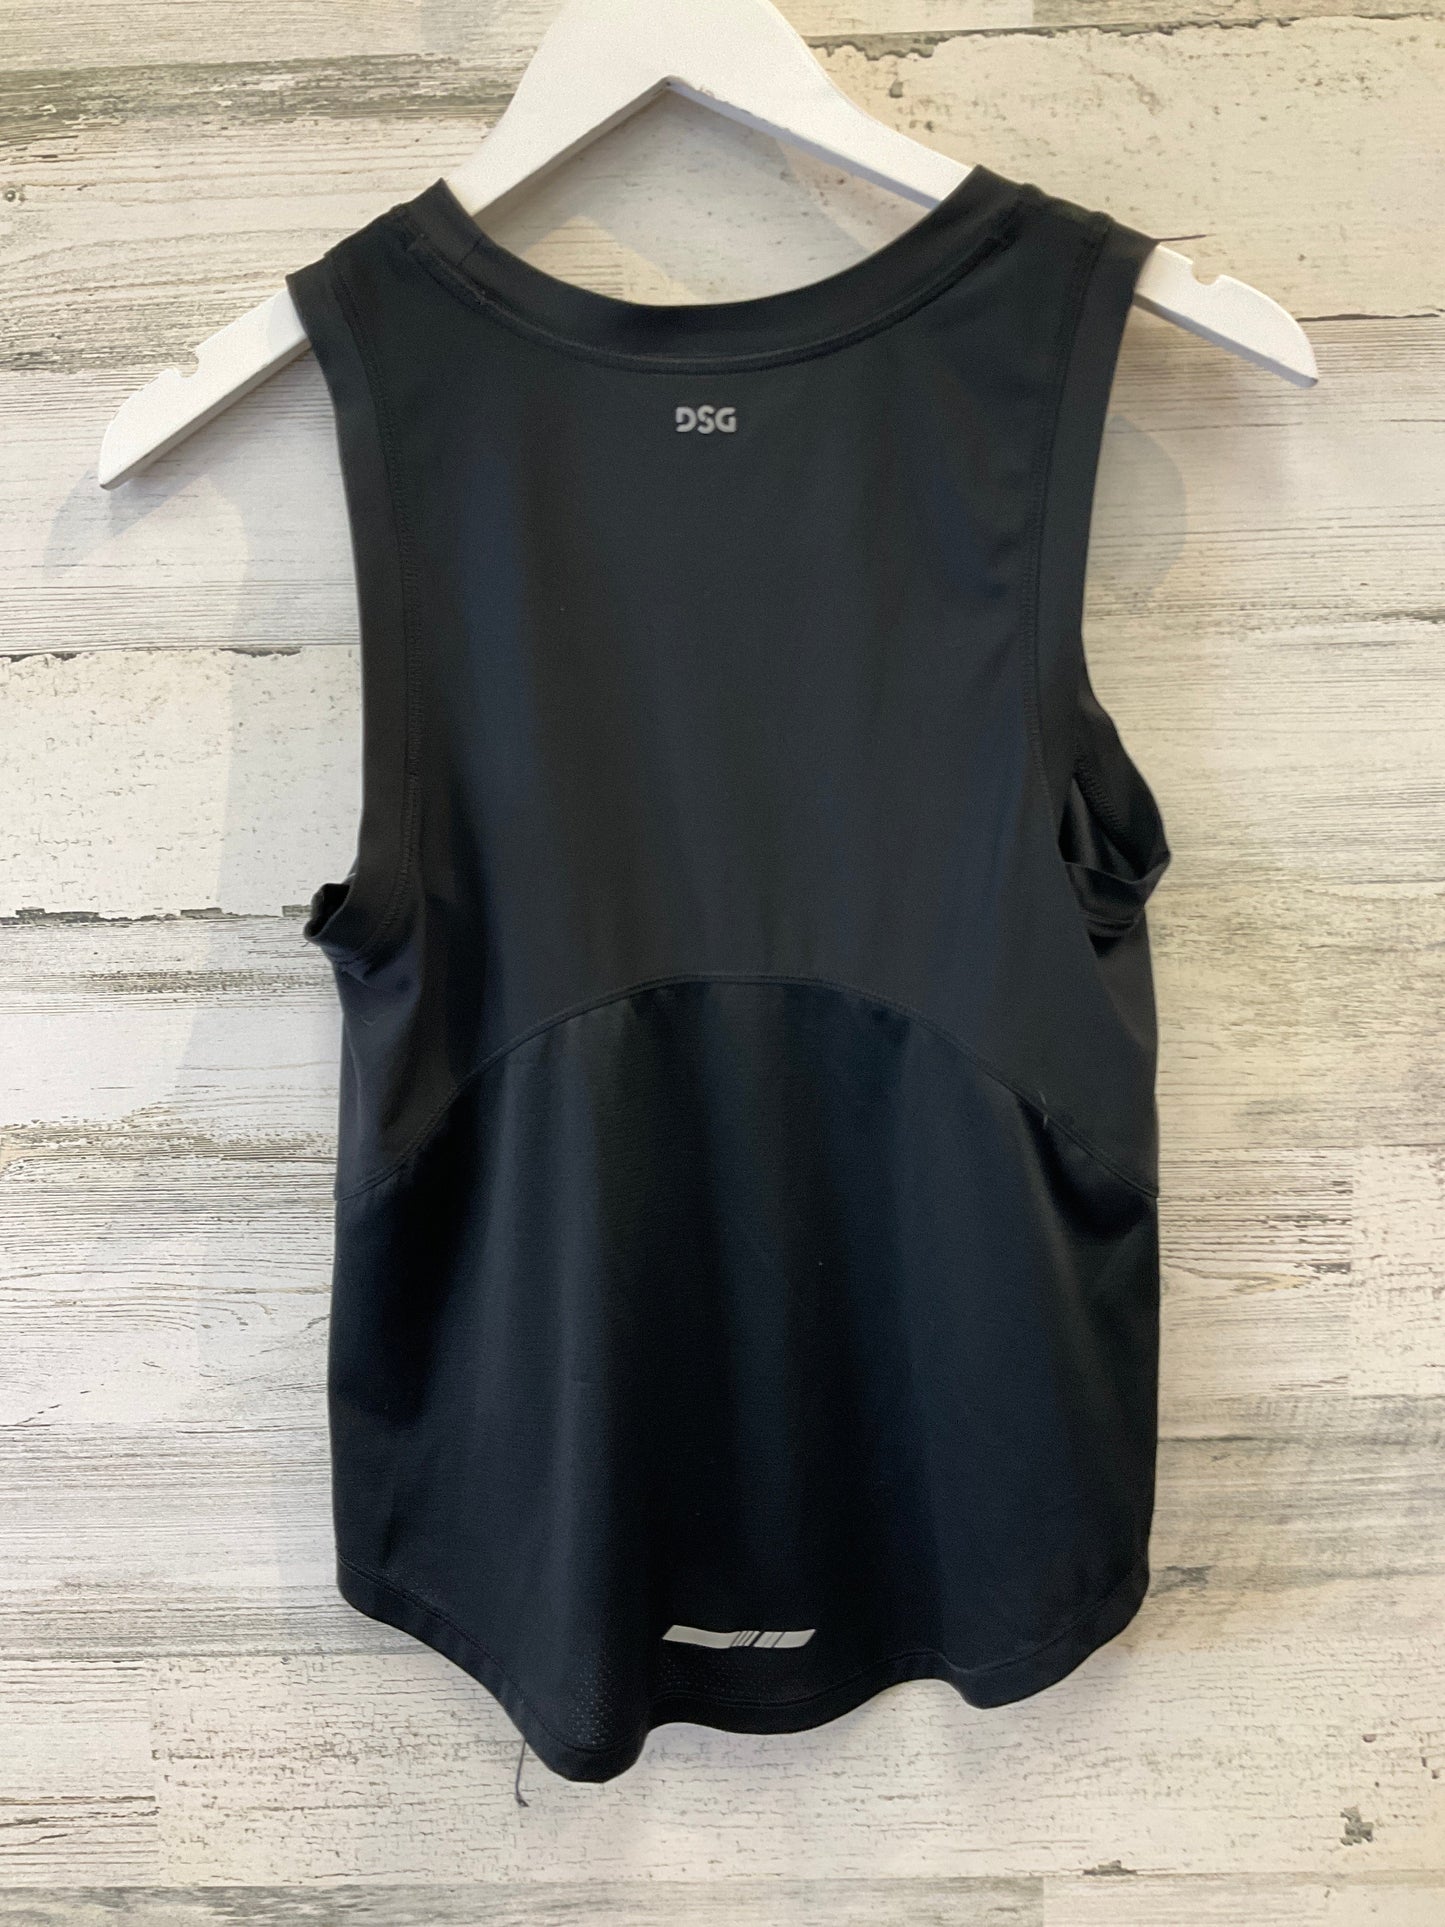 Black Athletic Top Short Sleeve Dsg Outerwear, Size Xs